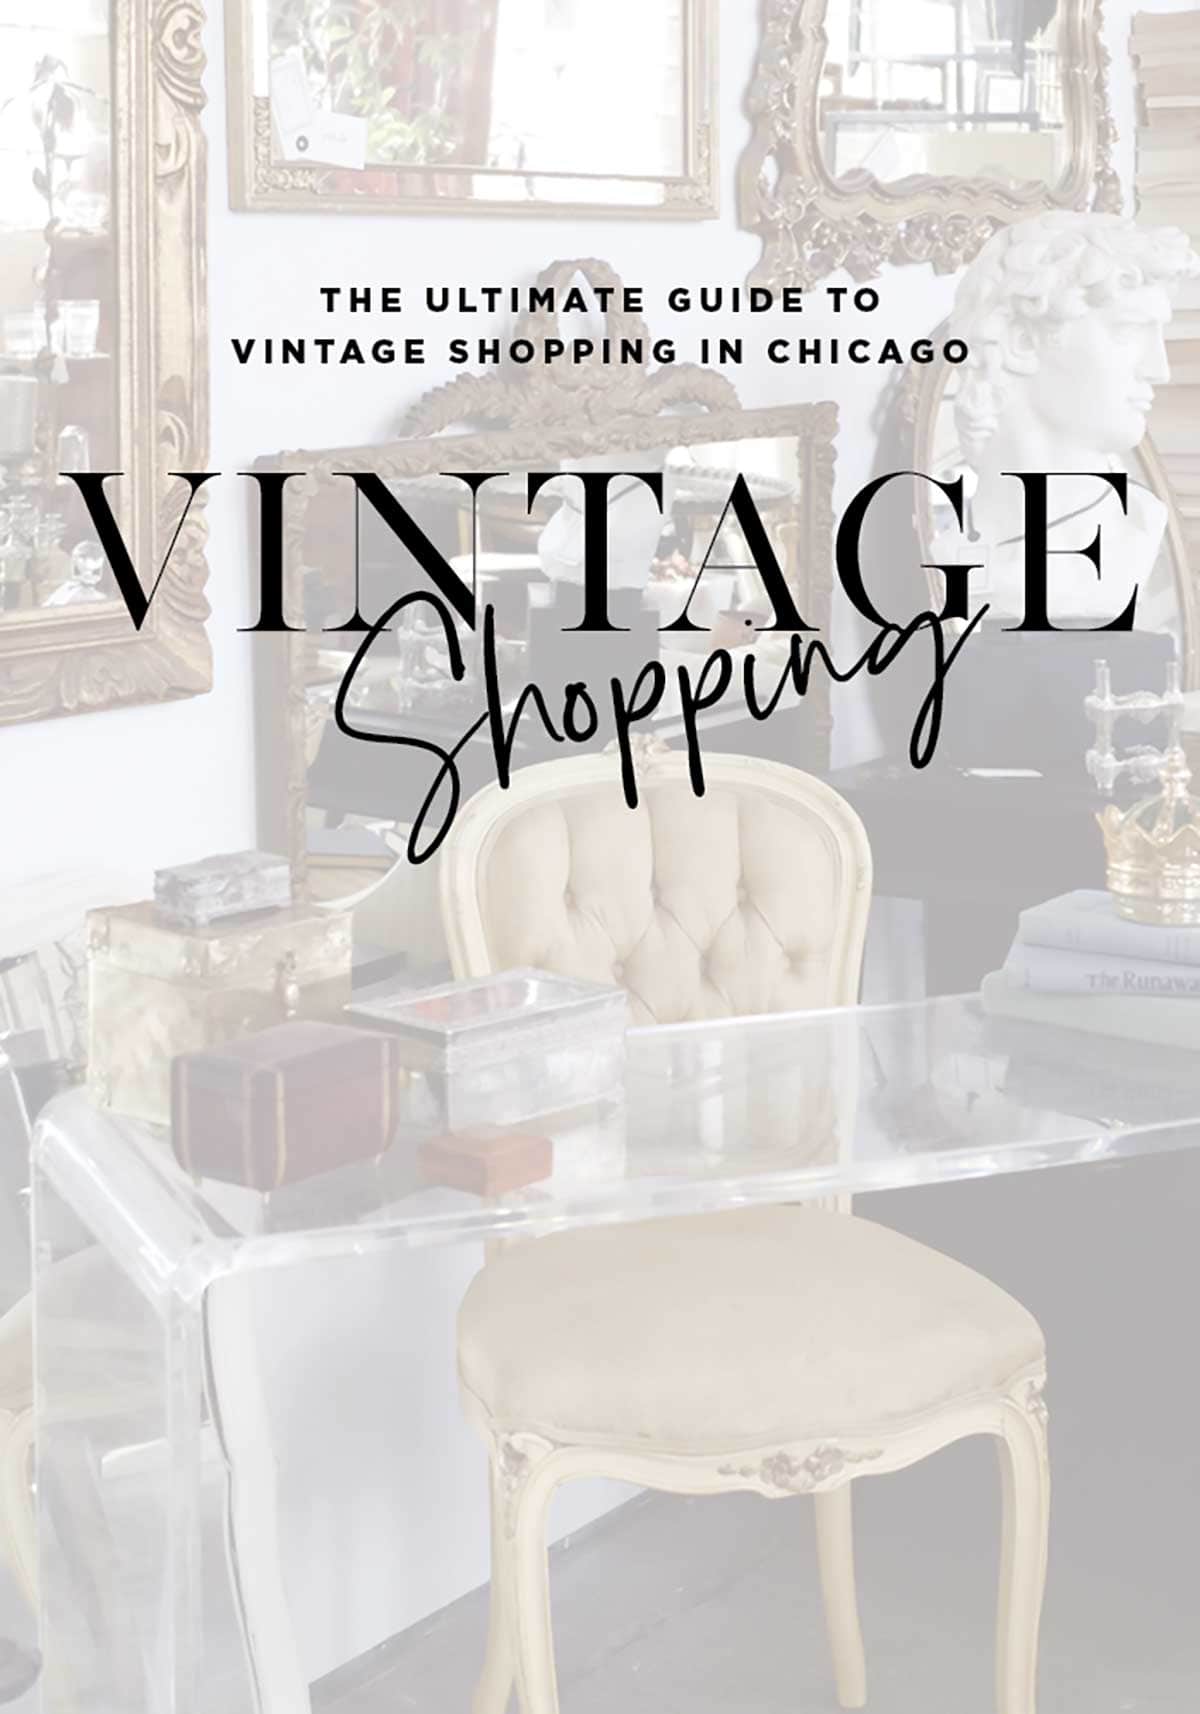 Guide To Vintage Shopping In Chicago - Discover the top 17 vintage shops in Chicago that the locals want to keep secret.